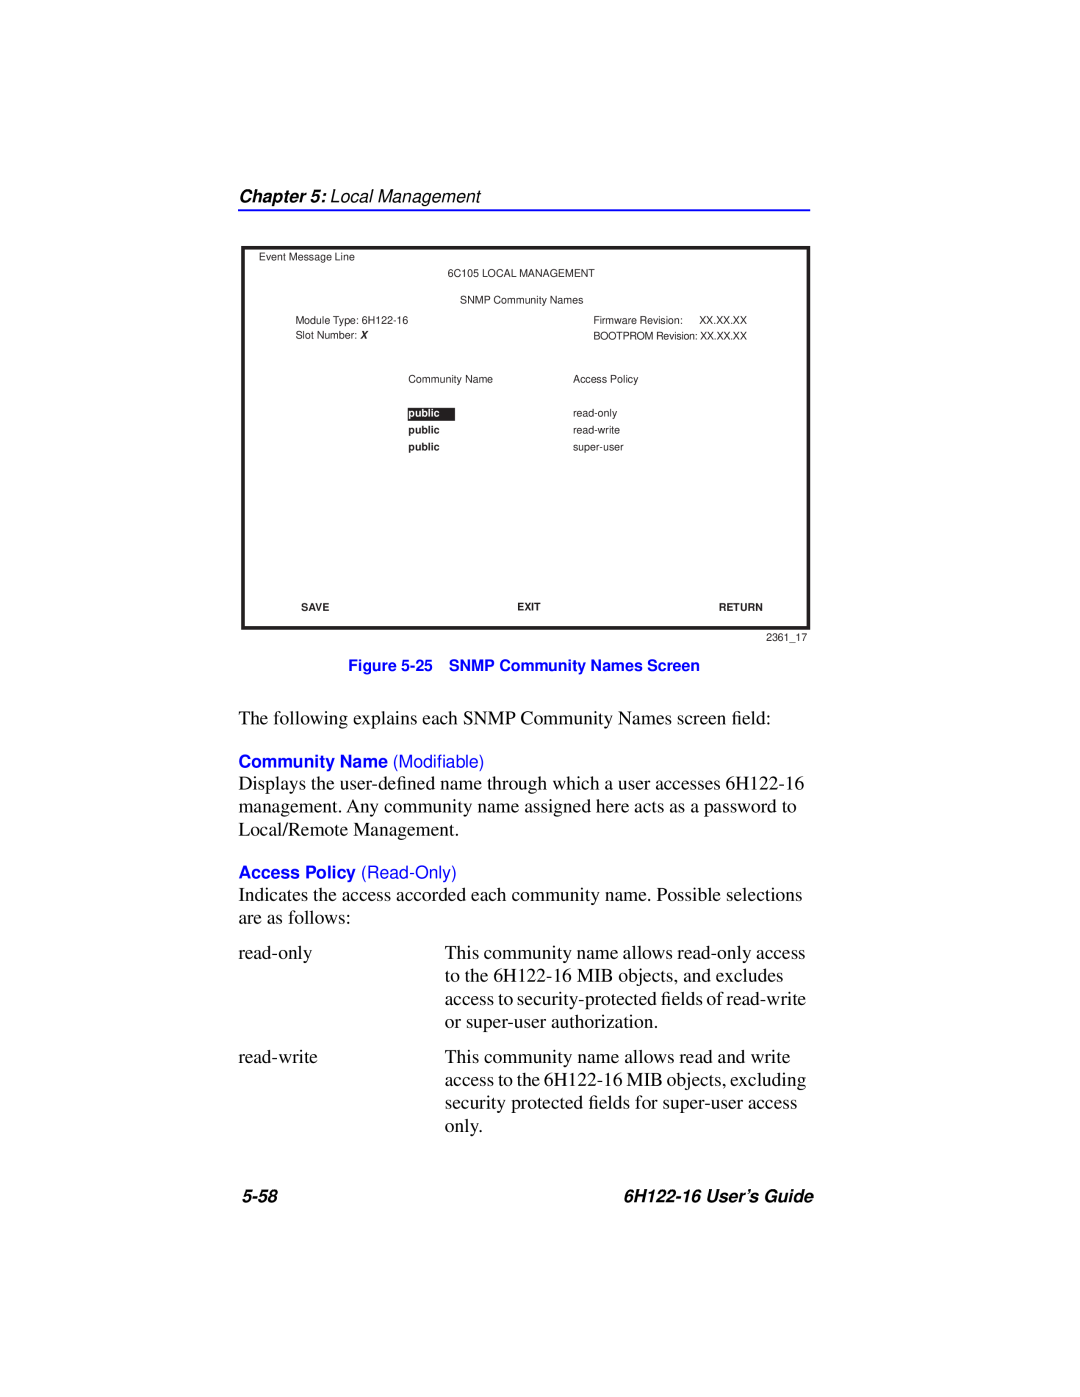 Cabletron Systems manual access to security-protected ﬁelds of read-write, access to the 6H122-16 MIB objects, excluding 